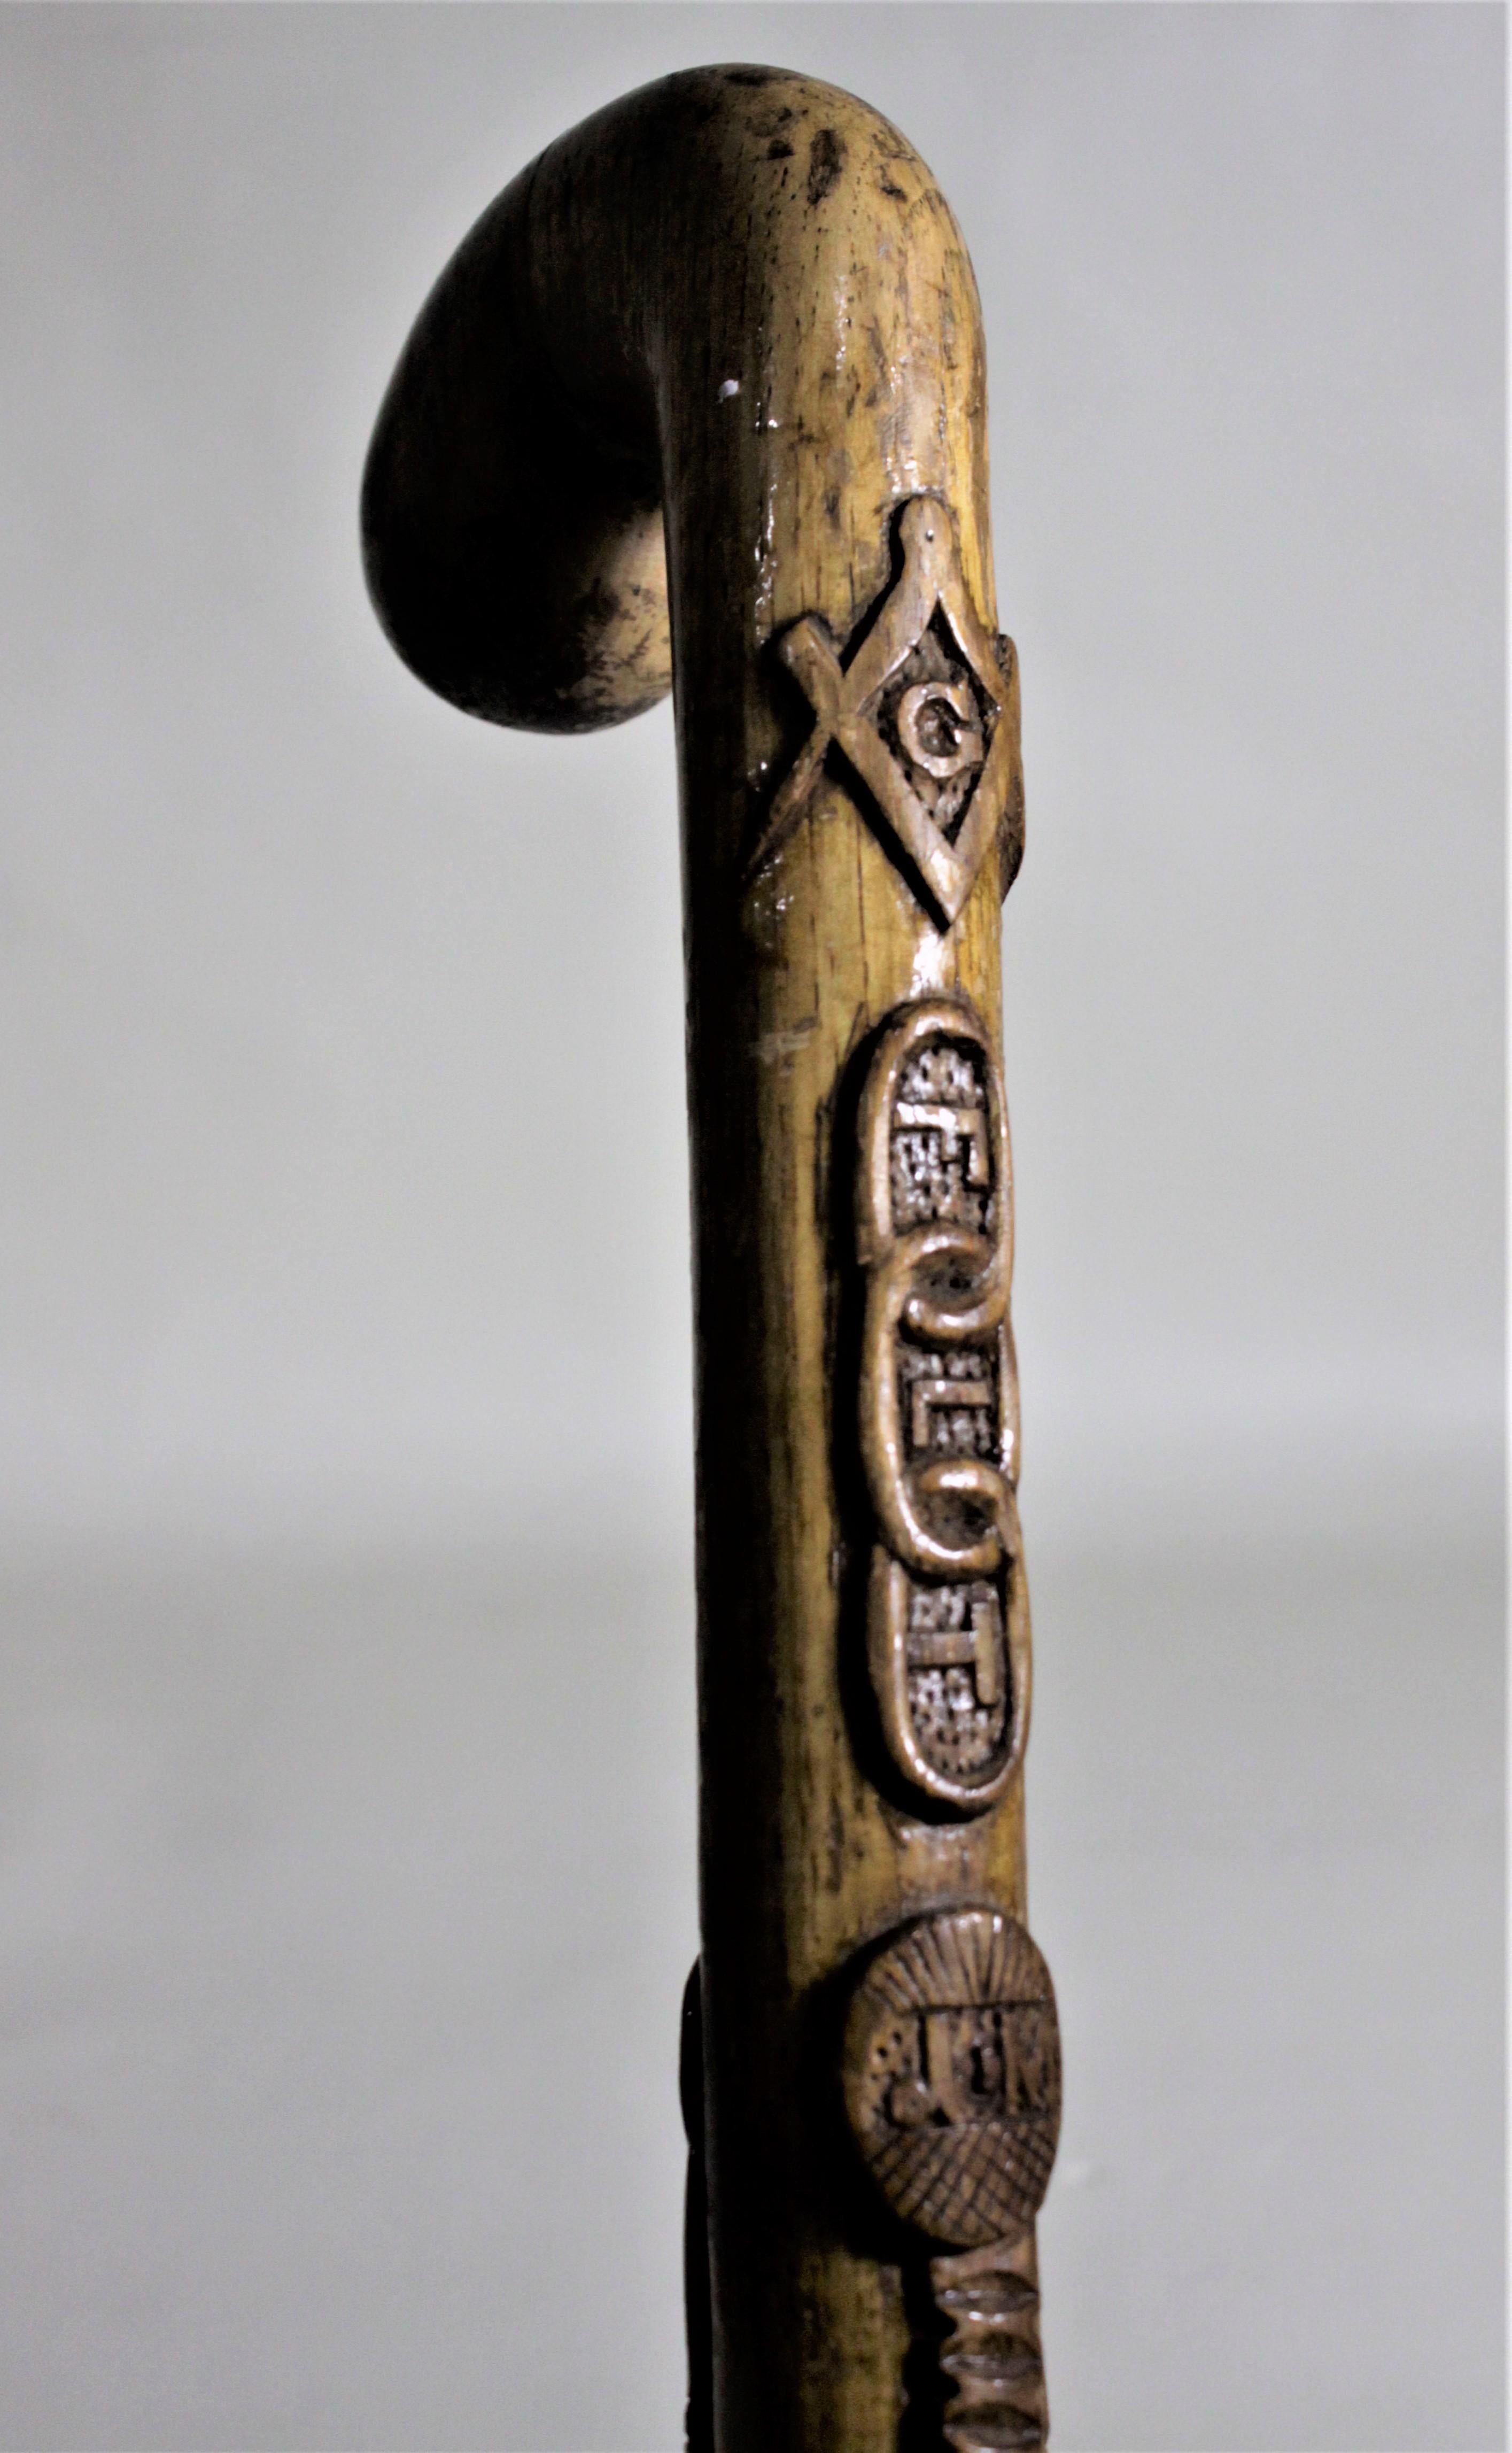 This antique Folk Art deeply hand carved walking cane most likely dates to the late 19th century and originates from Scotland or England. The cane is very intricately carved with the freemason's symbol at the top followed by a depiction of the